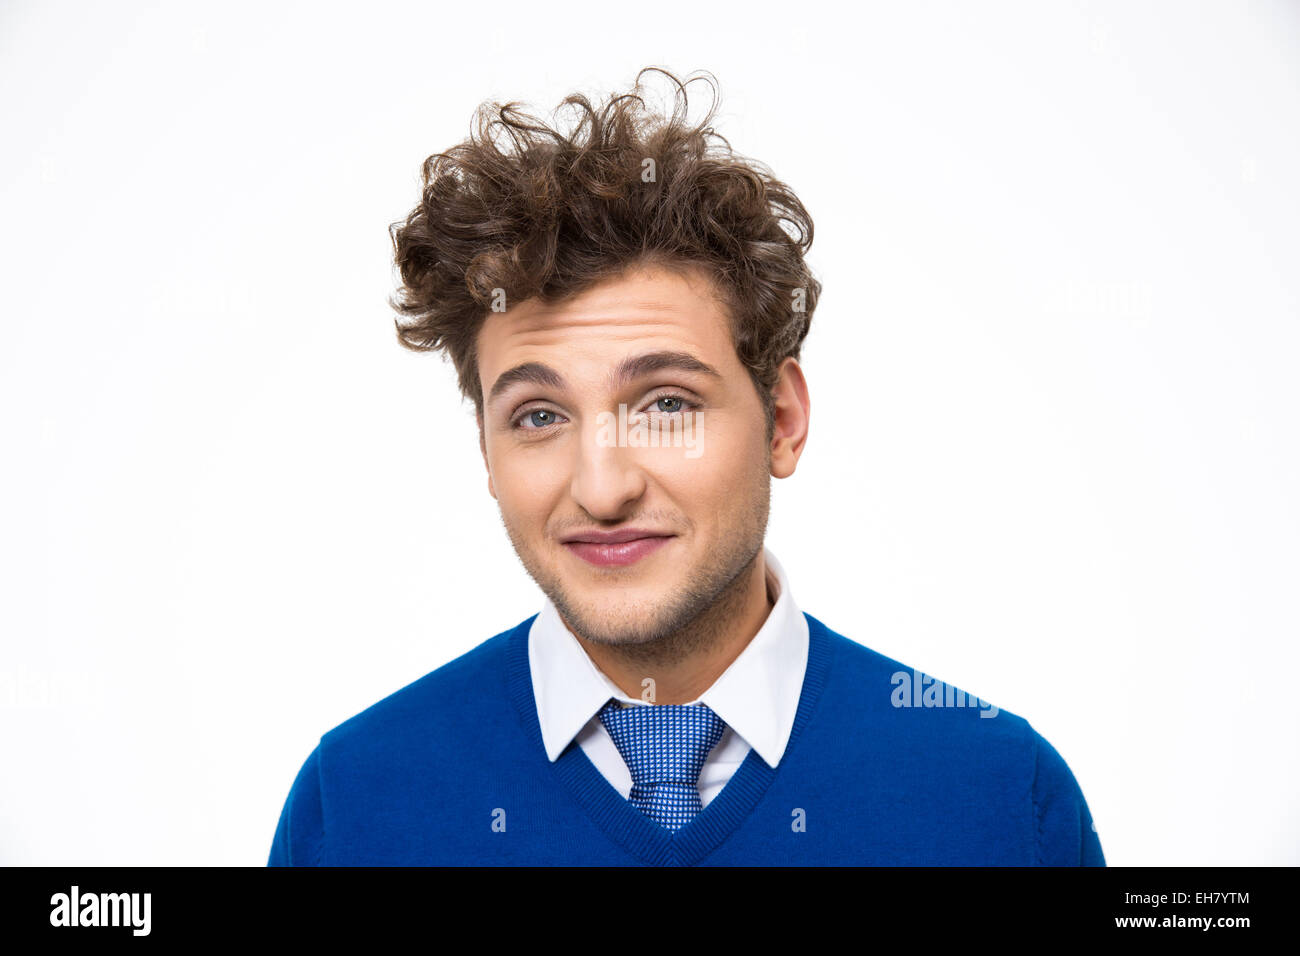 Smiling man with curly hair over white background Banque D'Images